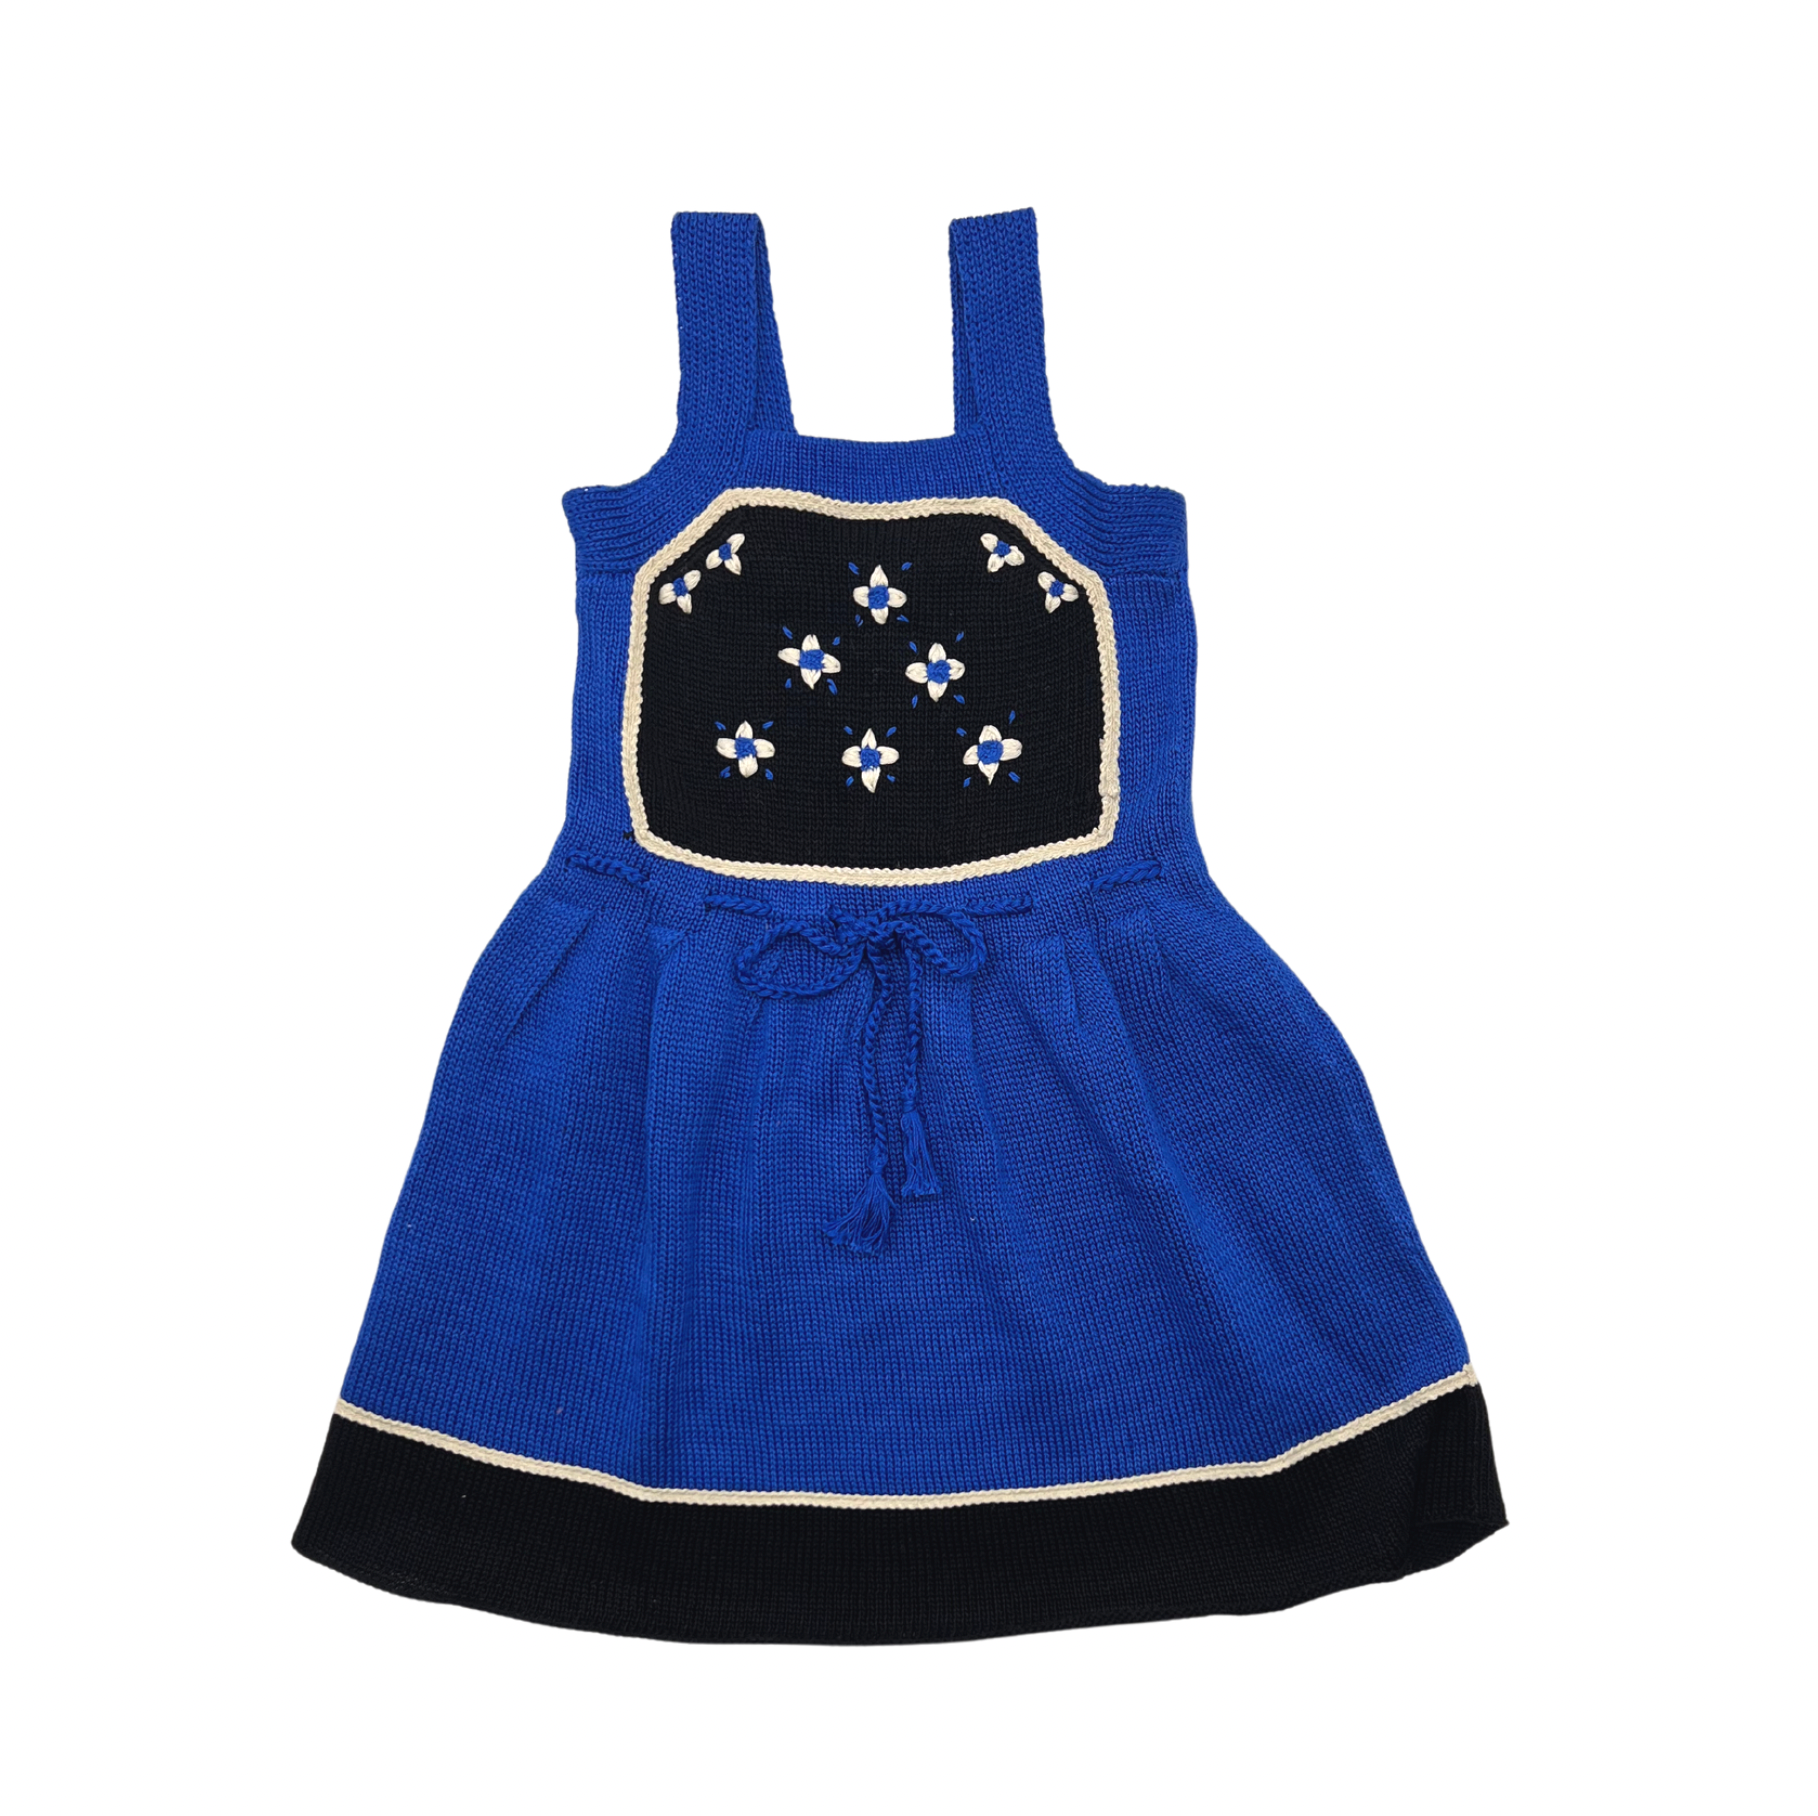 CARAMEL - Hand-embroidered Bolivian dress - 3 years old